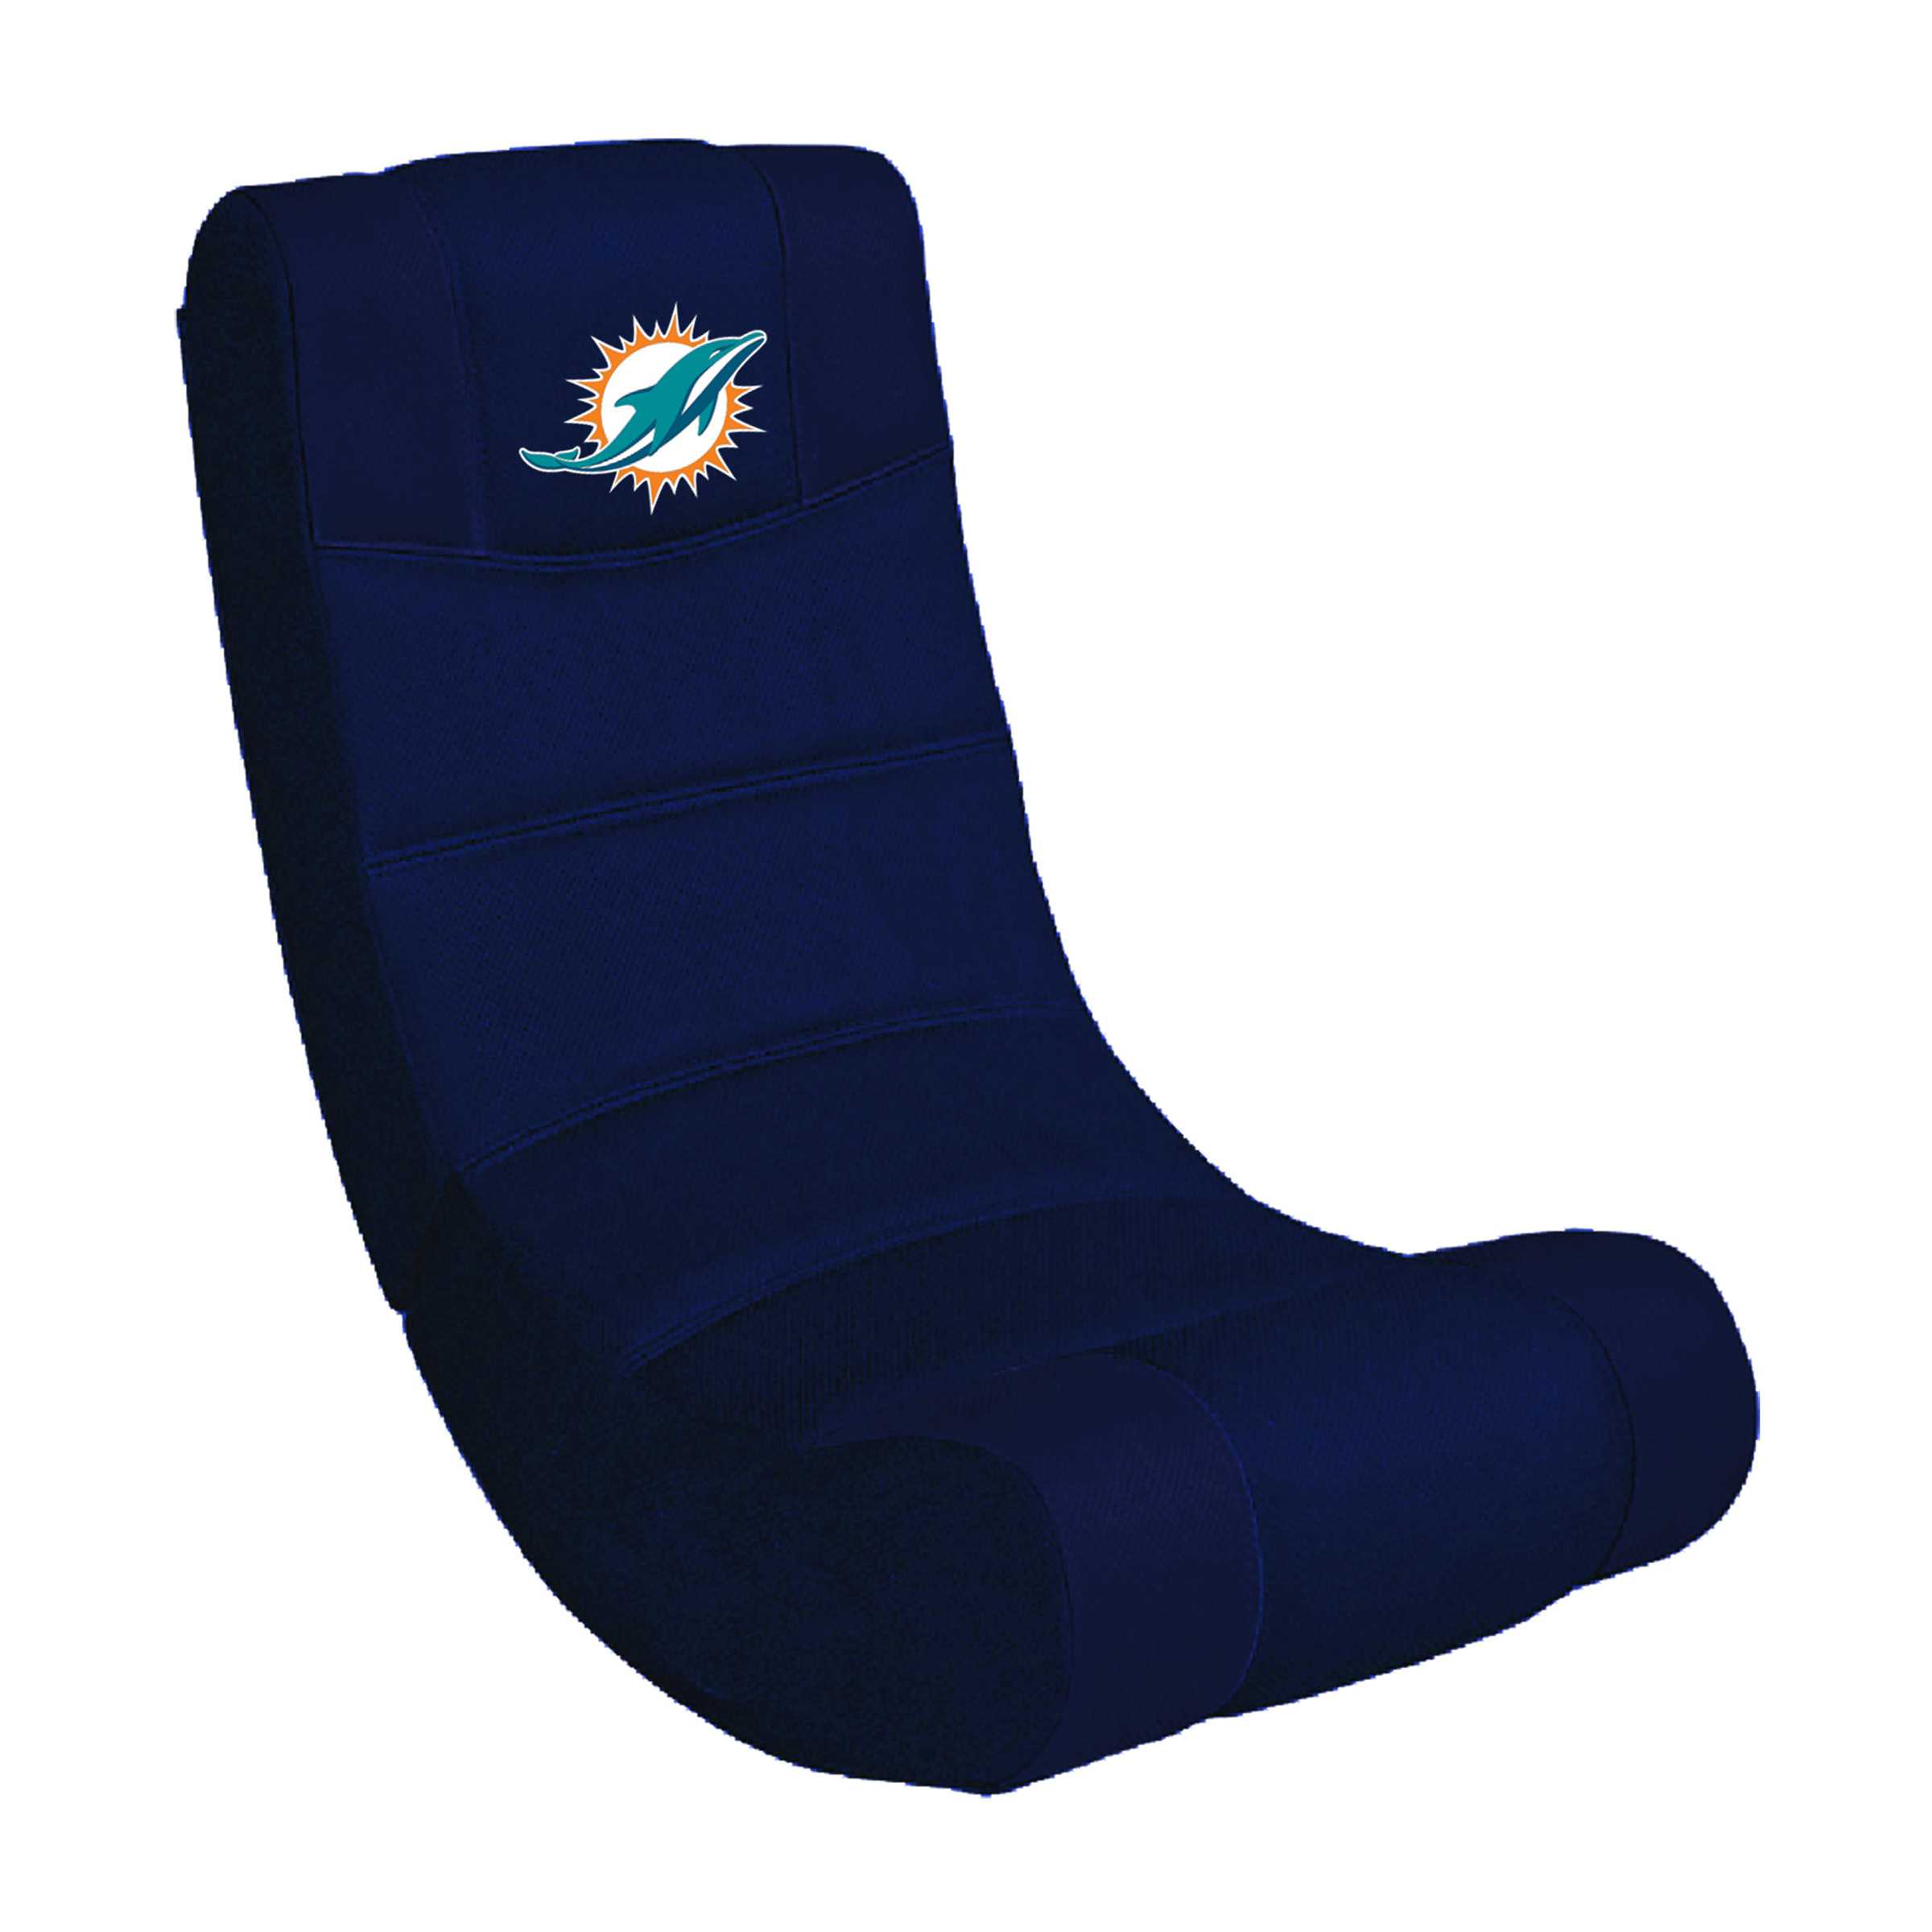 MIAMI DOLPHINS VIDEO CHAIR